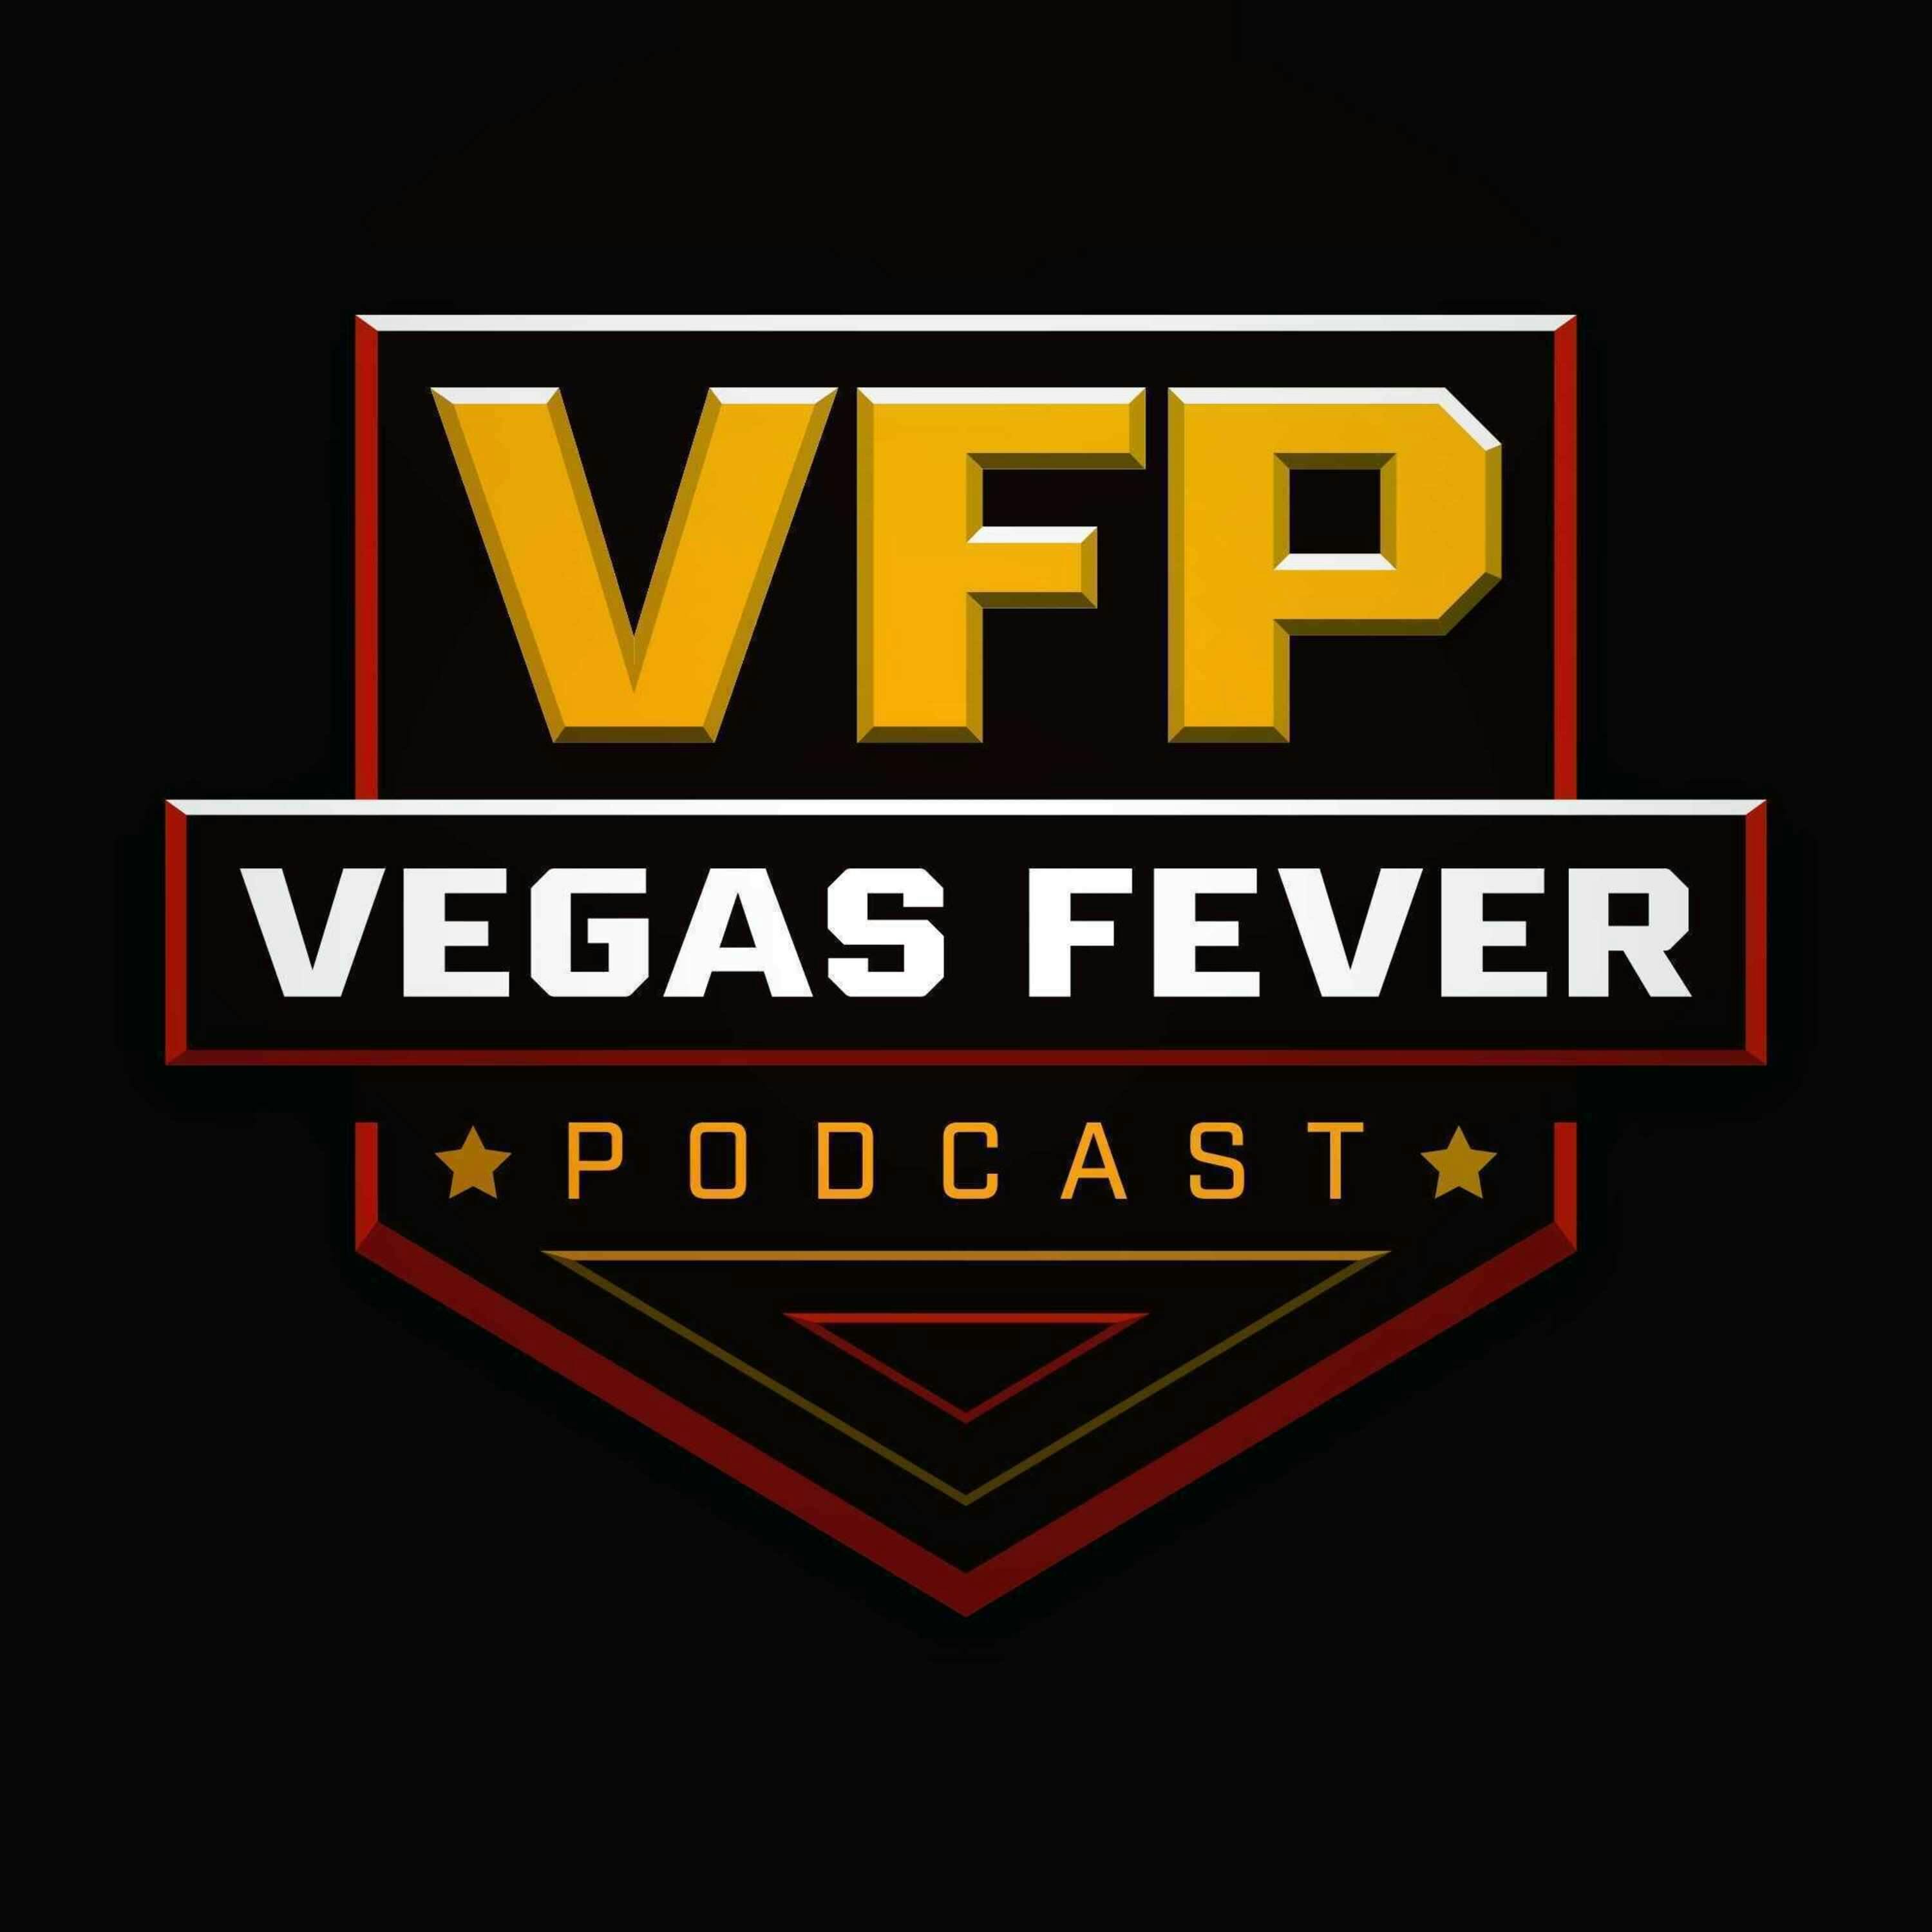 Episode 18- We talk UNLV’s player additions & subtractions, VGK adds a player at the trade deadline.